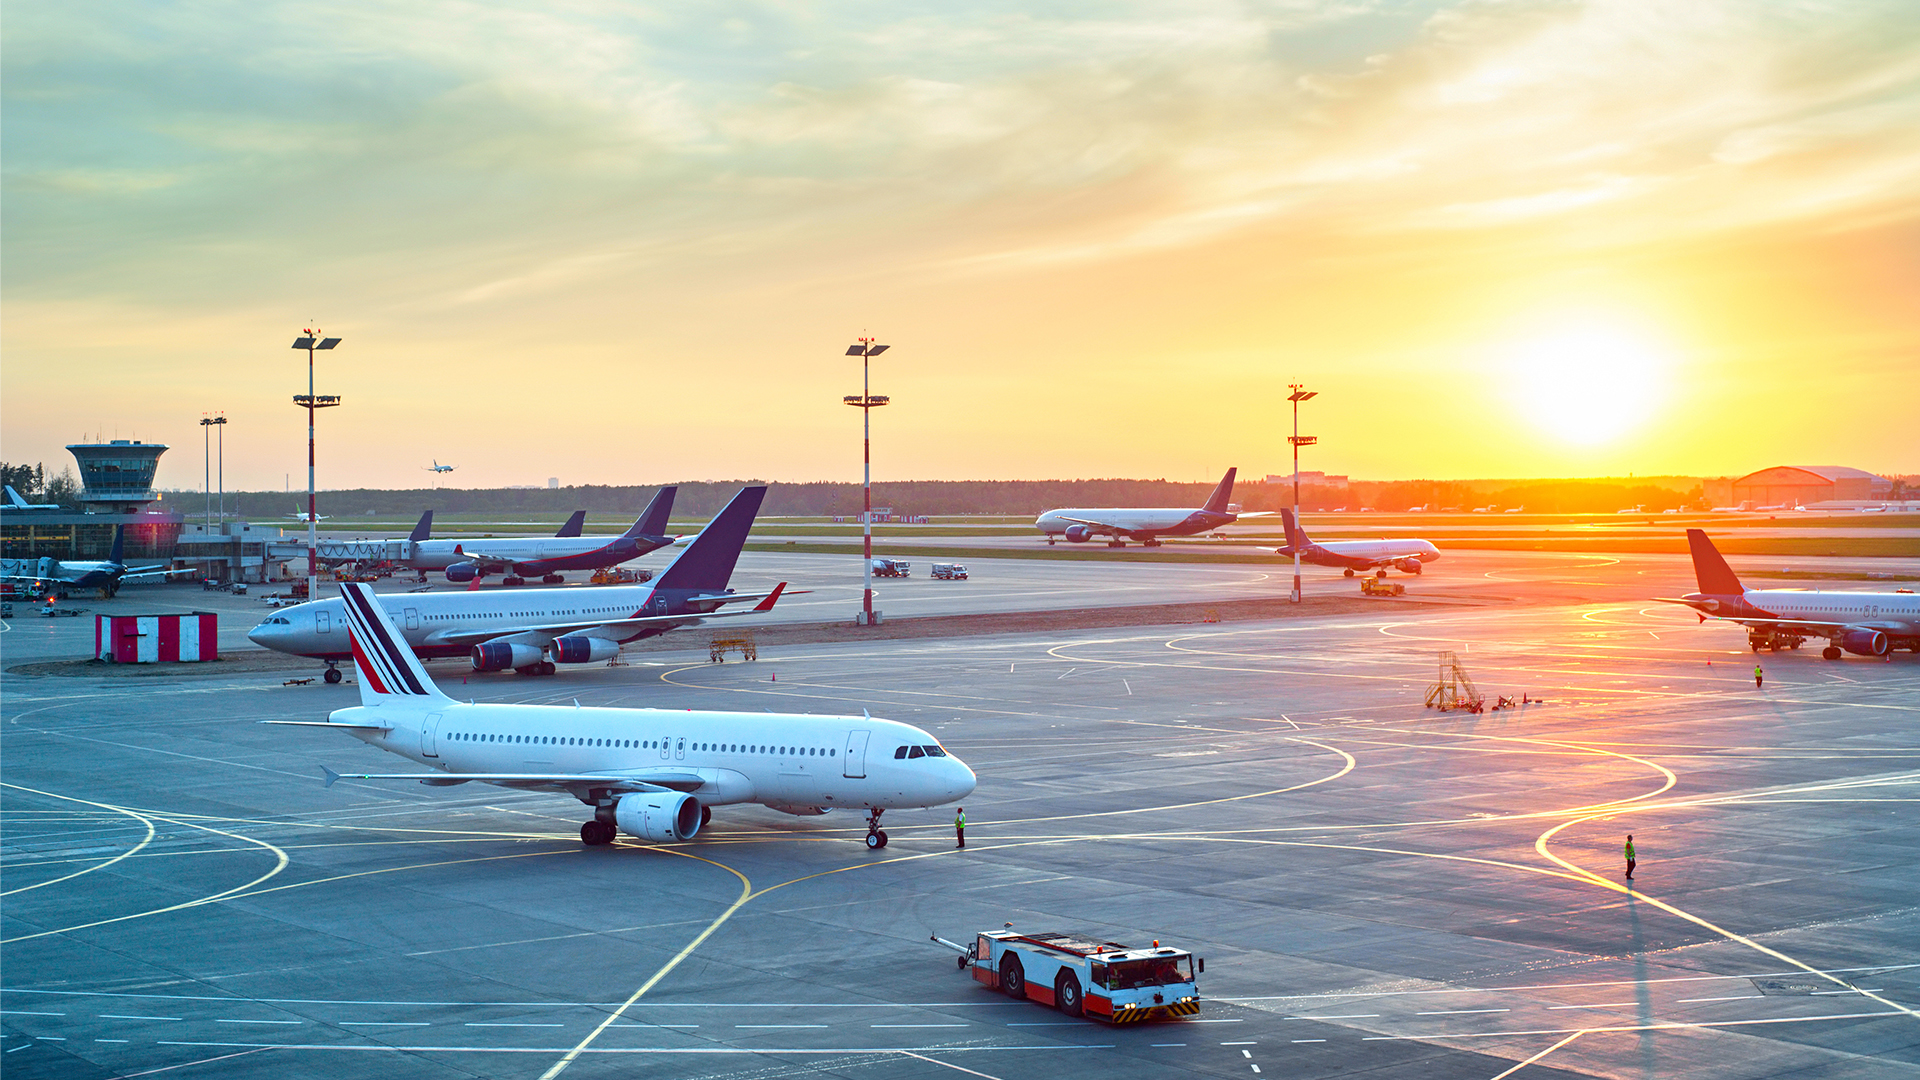 Airport with many airplanes at beautiful sunset